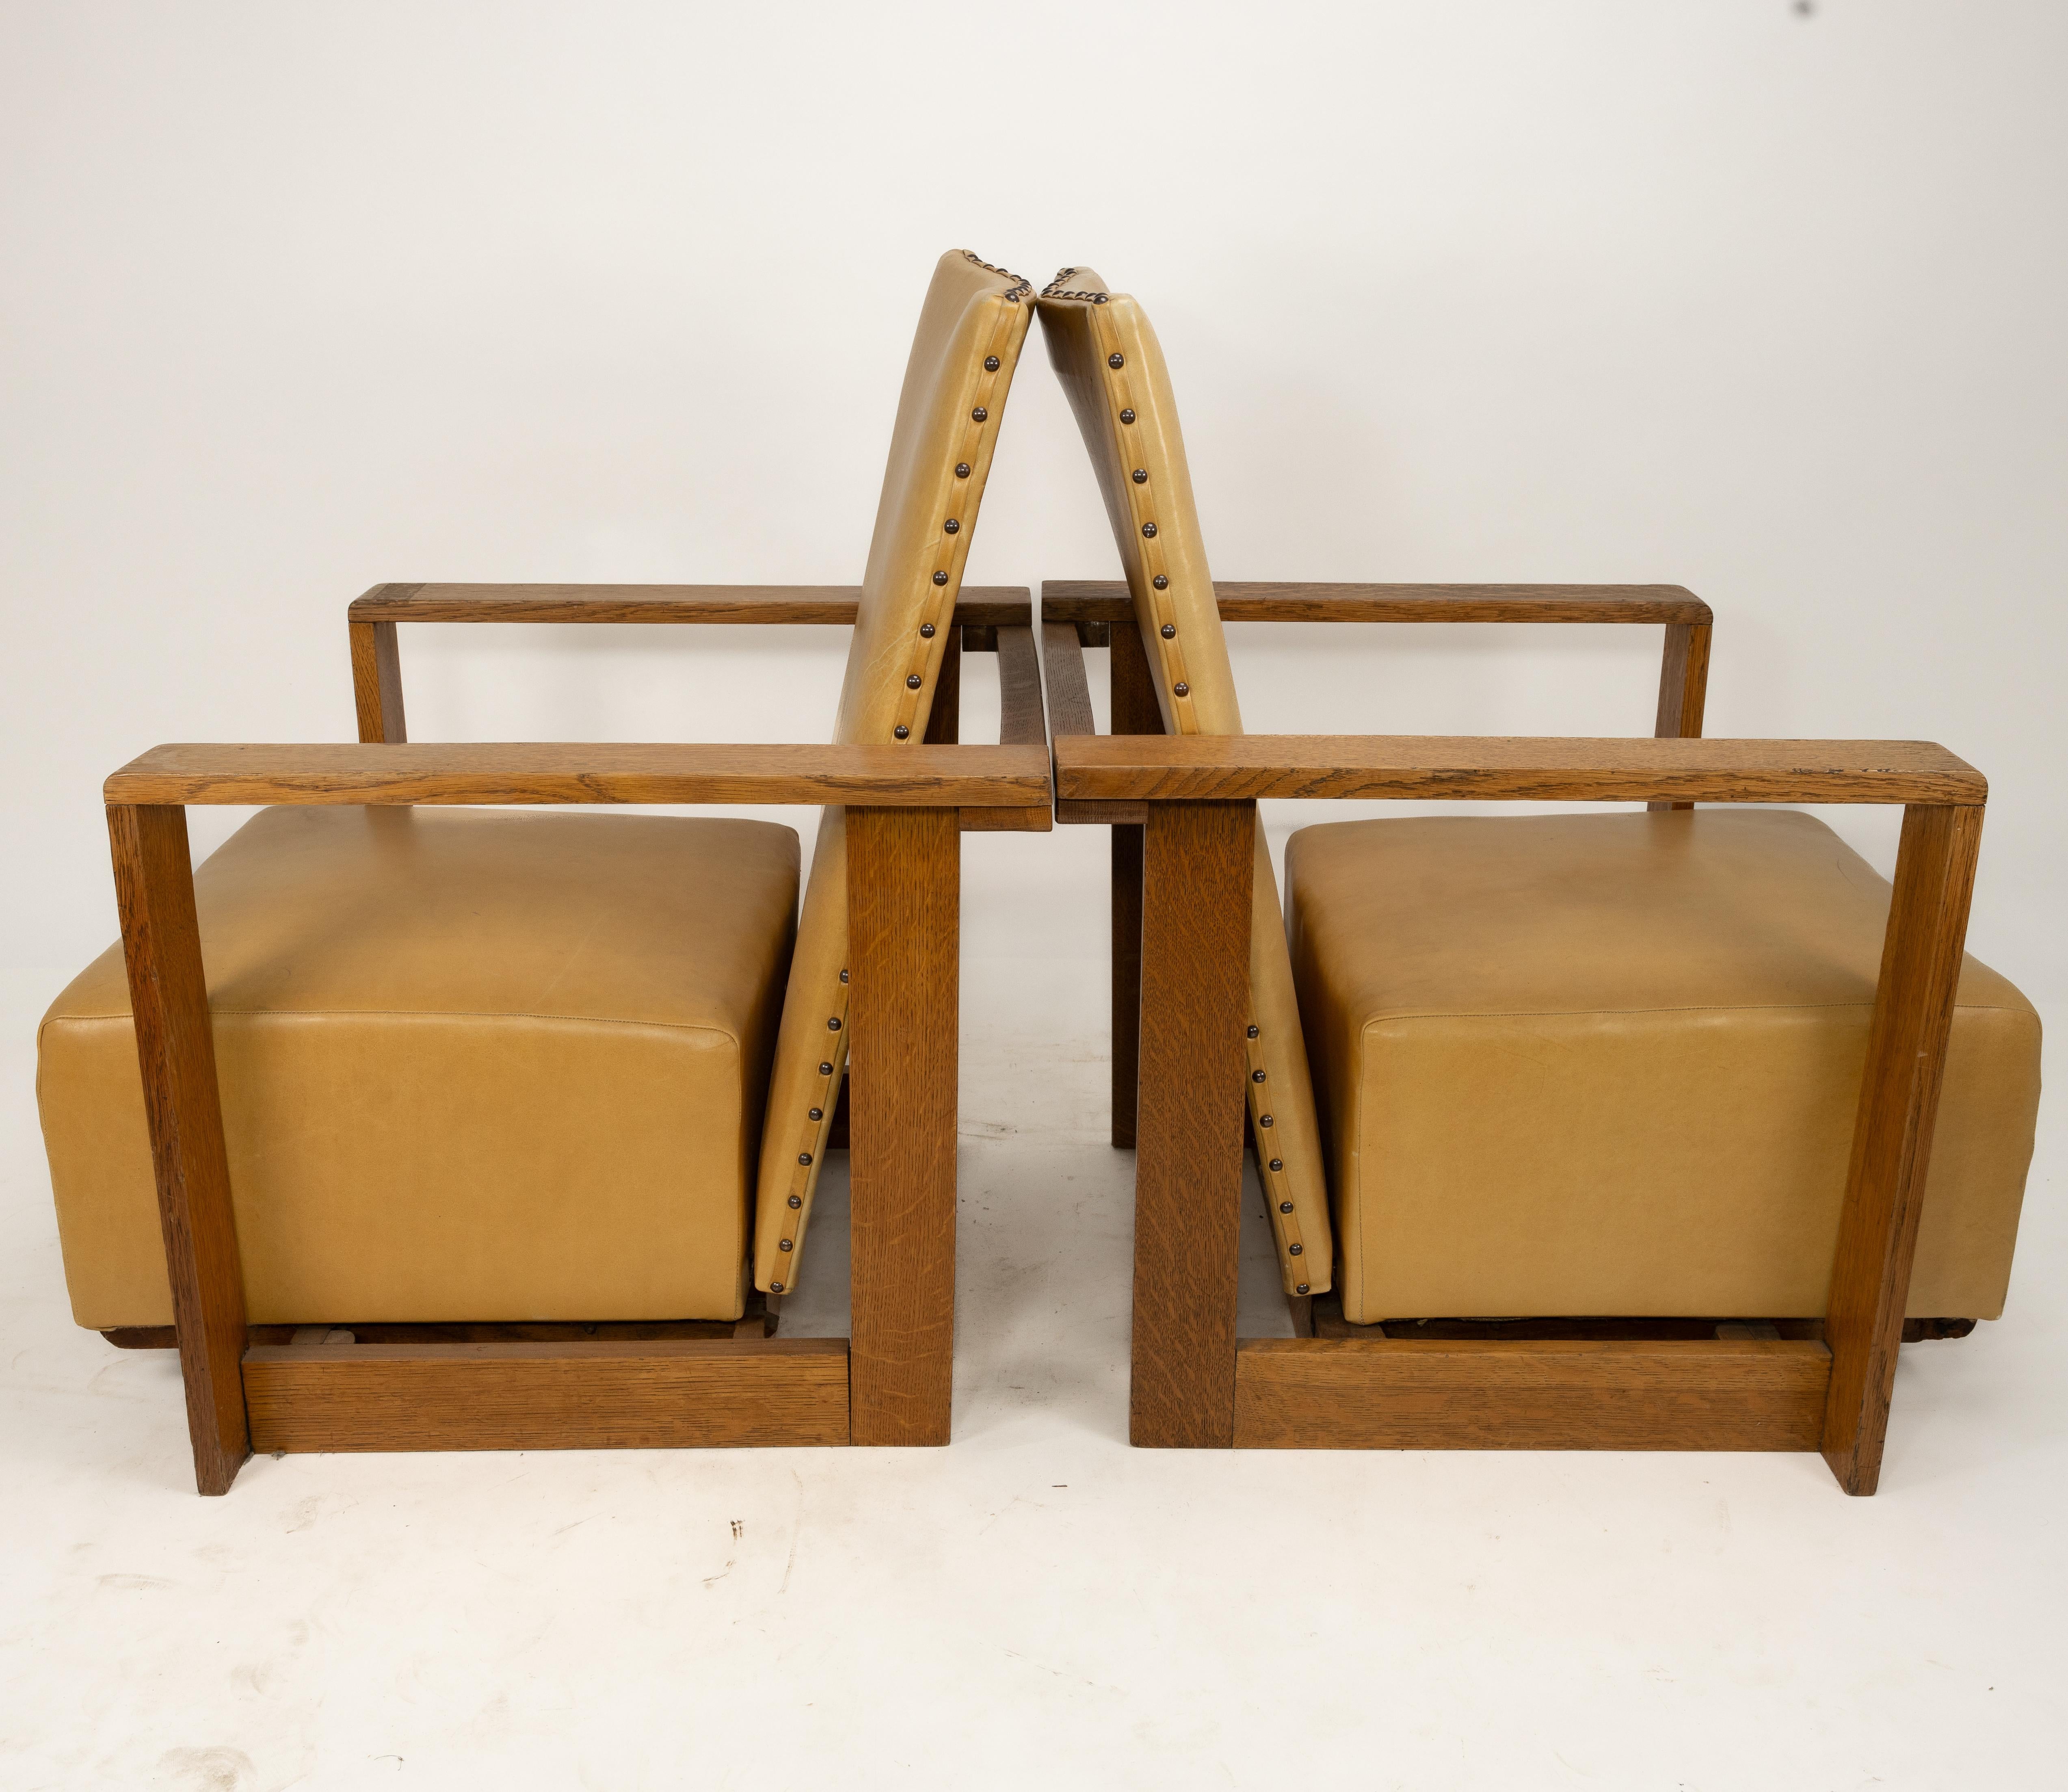 W. H. (Curly) Russell (1906-1971) for Gordon Russell, three oak reclining armchairs, designed in 1930, all professionally re-upholstered in fawn leather. The reclining mechanism works on two rails which allow the seat to move forward and the back to